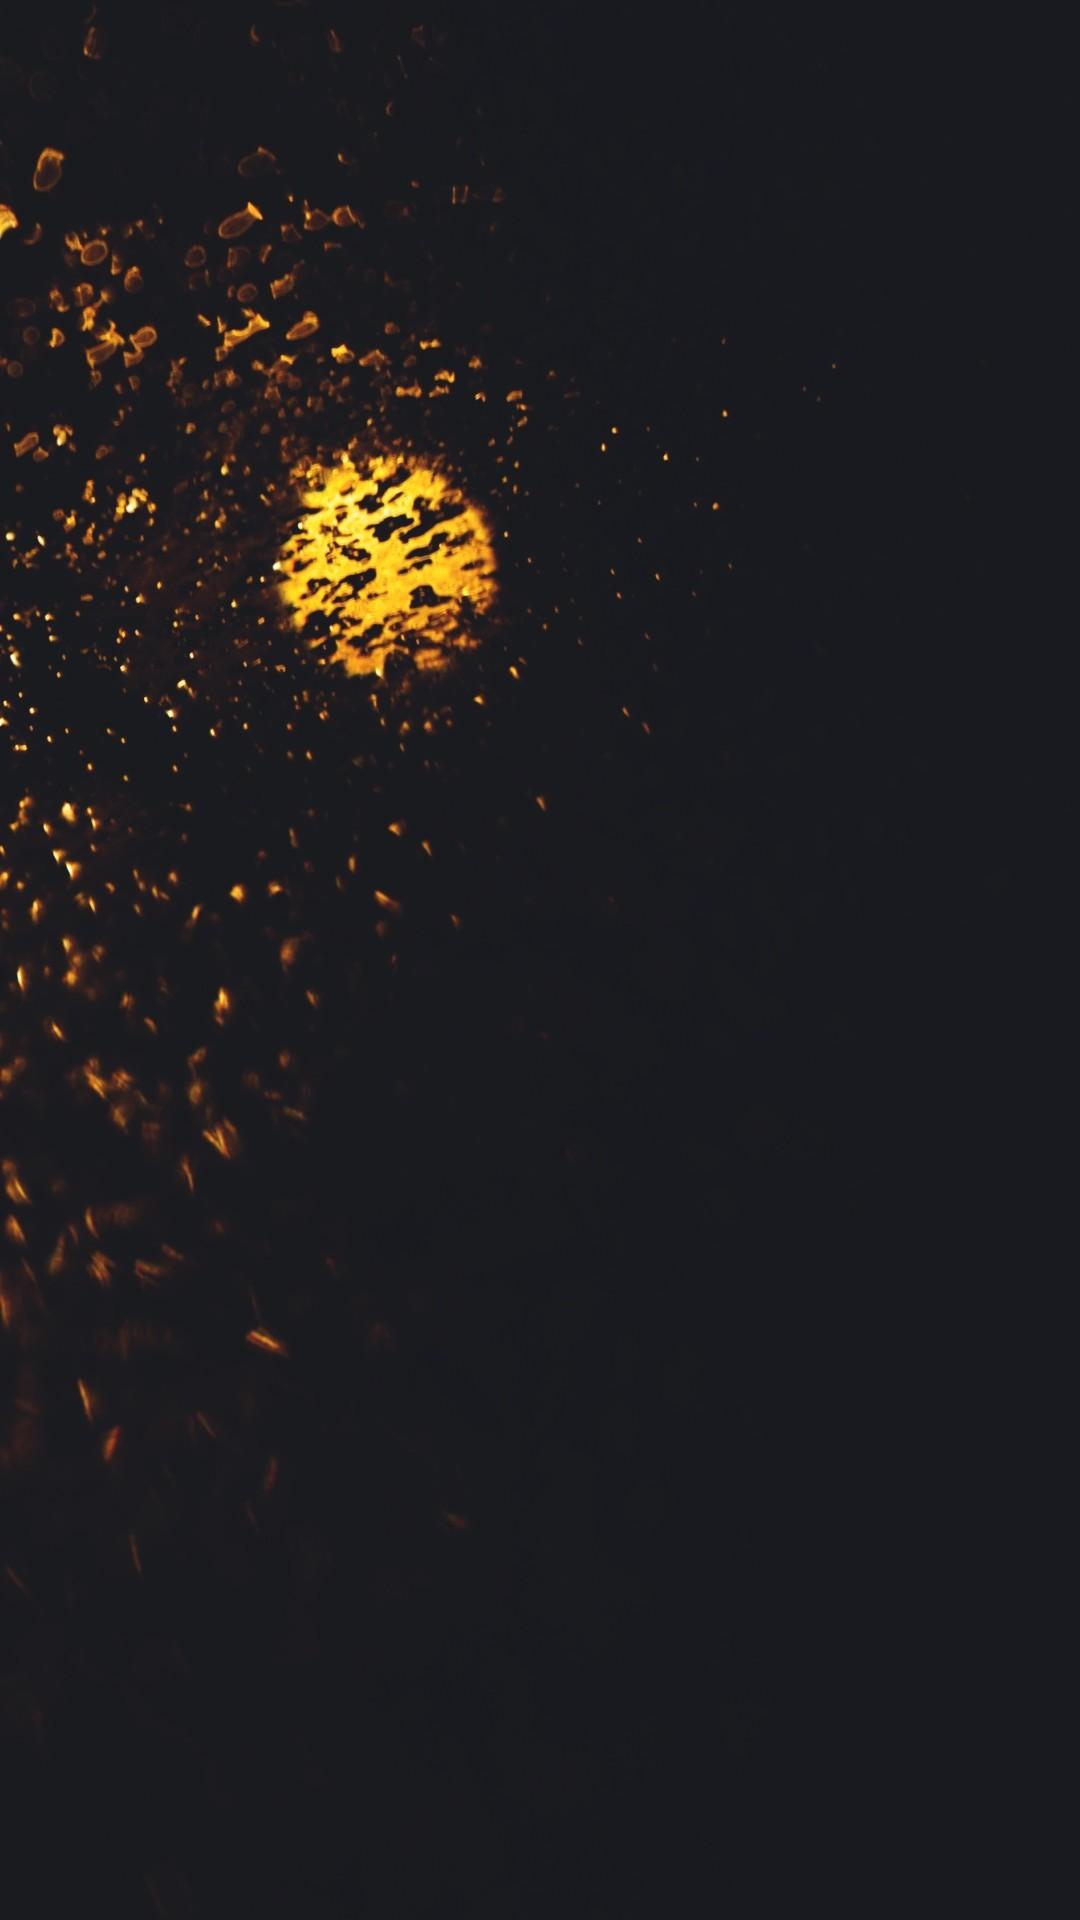 Gold and Black Wallpaper